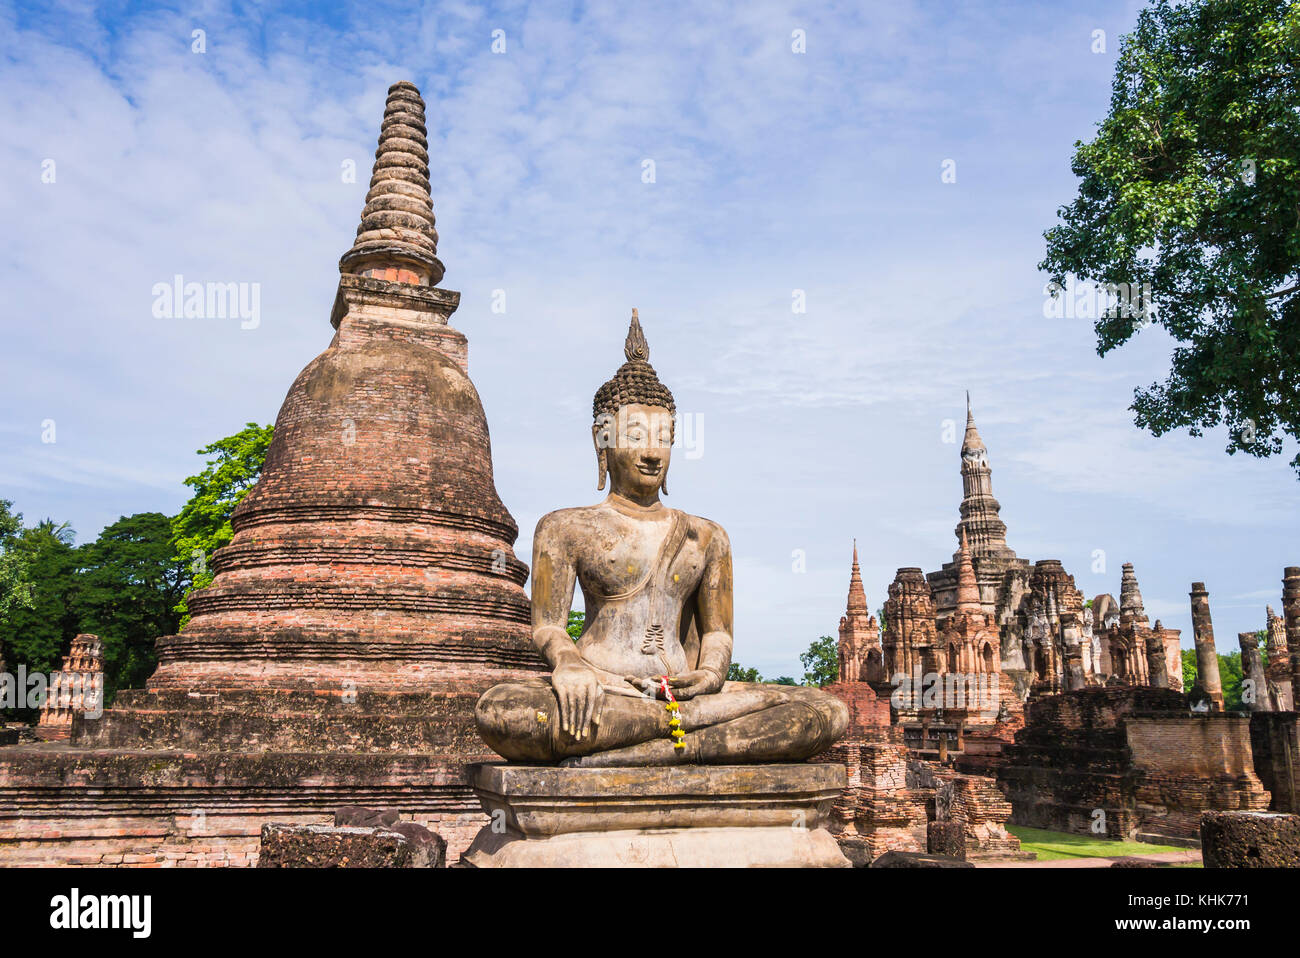 Overview of Stupa and Buddha Statue in Wat Mahathat Temple, Sukhothai Historical Park, Thailand Stock Photo